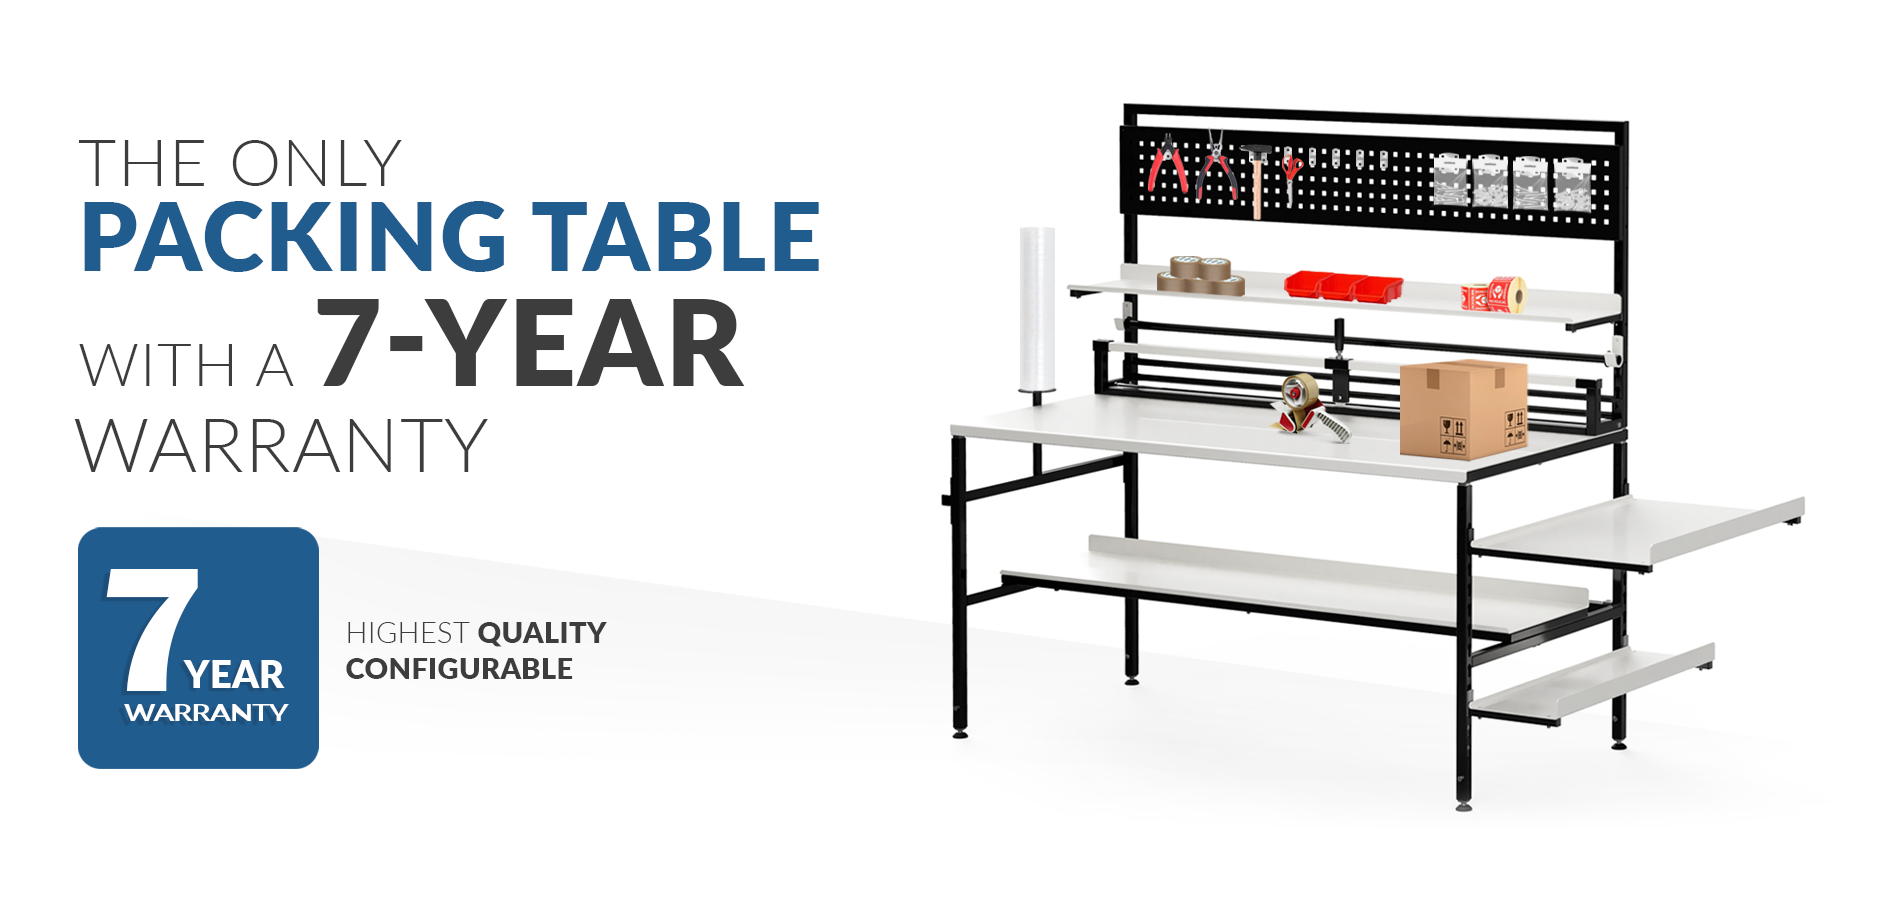 Packing table 7-year warranty